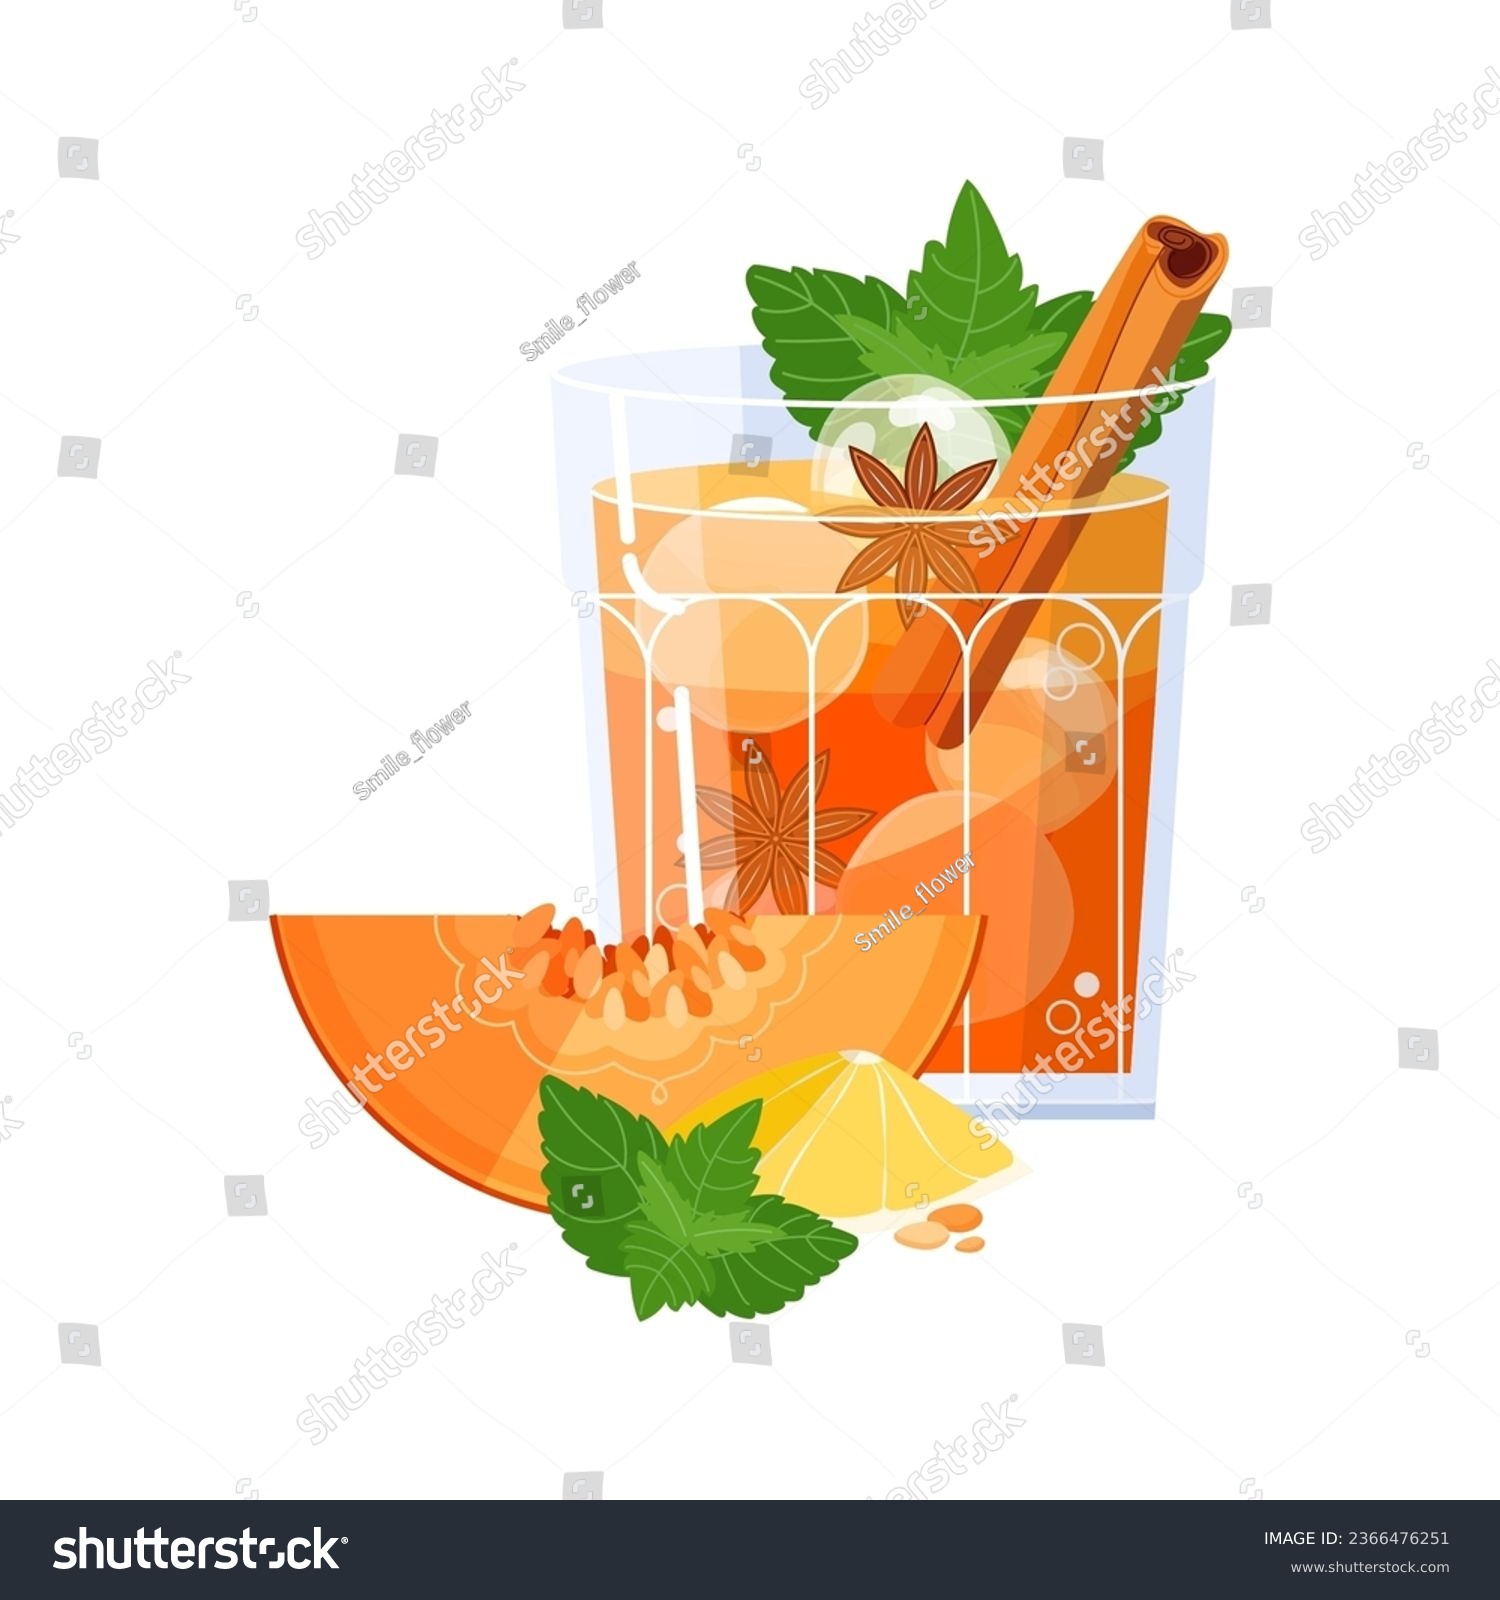 SVG of Pumpkin whiskey smash cocktail isolated on white background. Fall alcohol drink with ice, pumpkin syrup and spices, cinnamon stick, lemon and star anise. Autumn beverage vector illustration svg